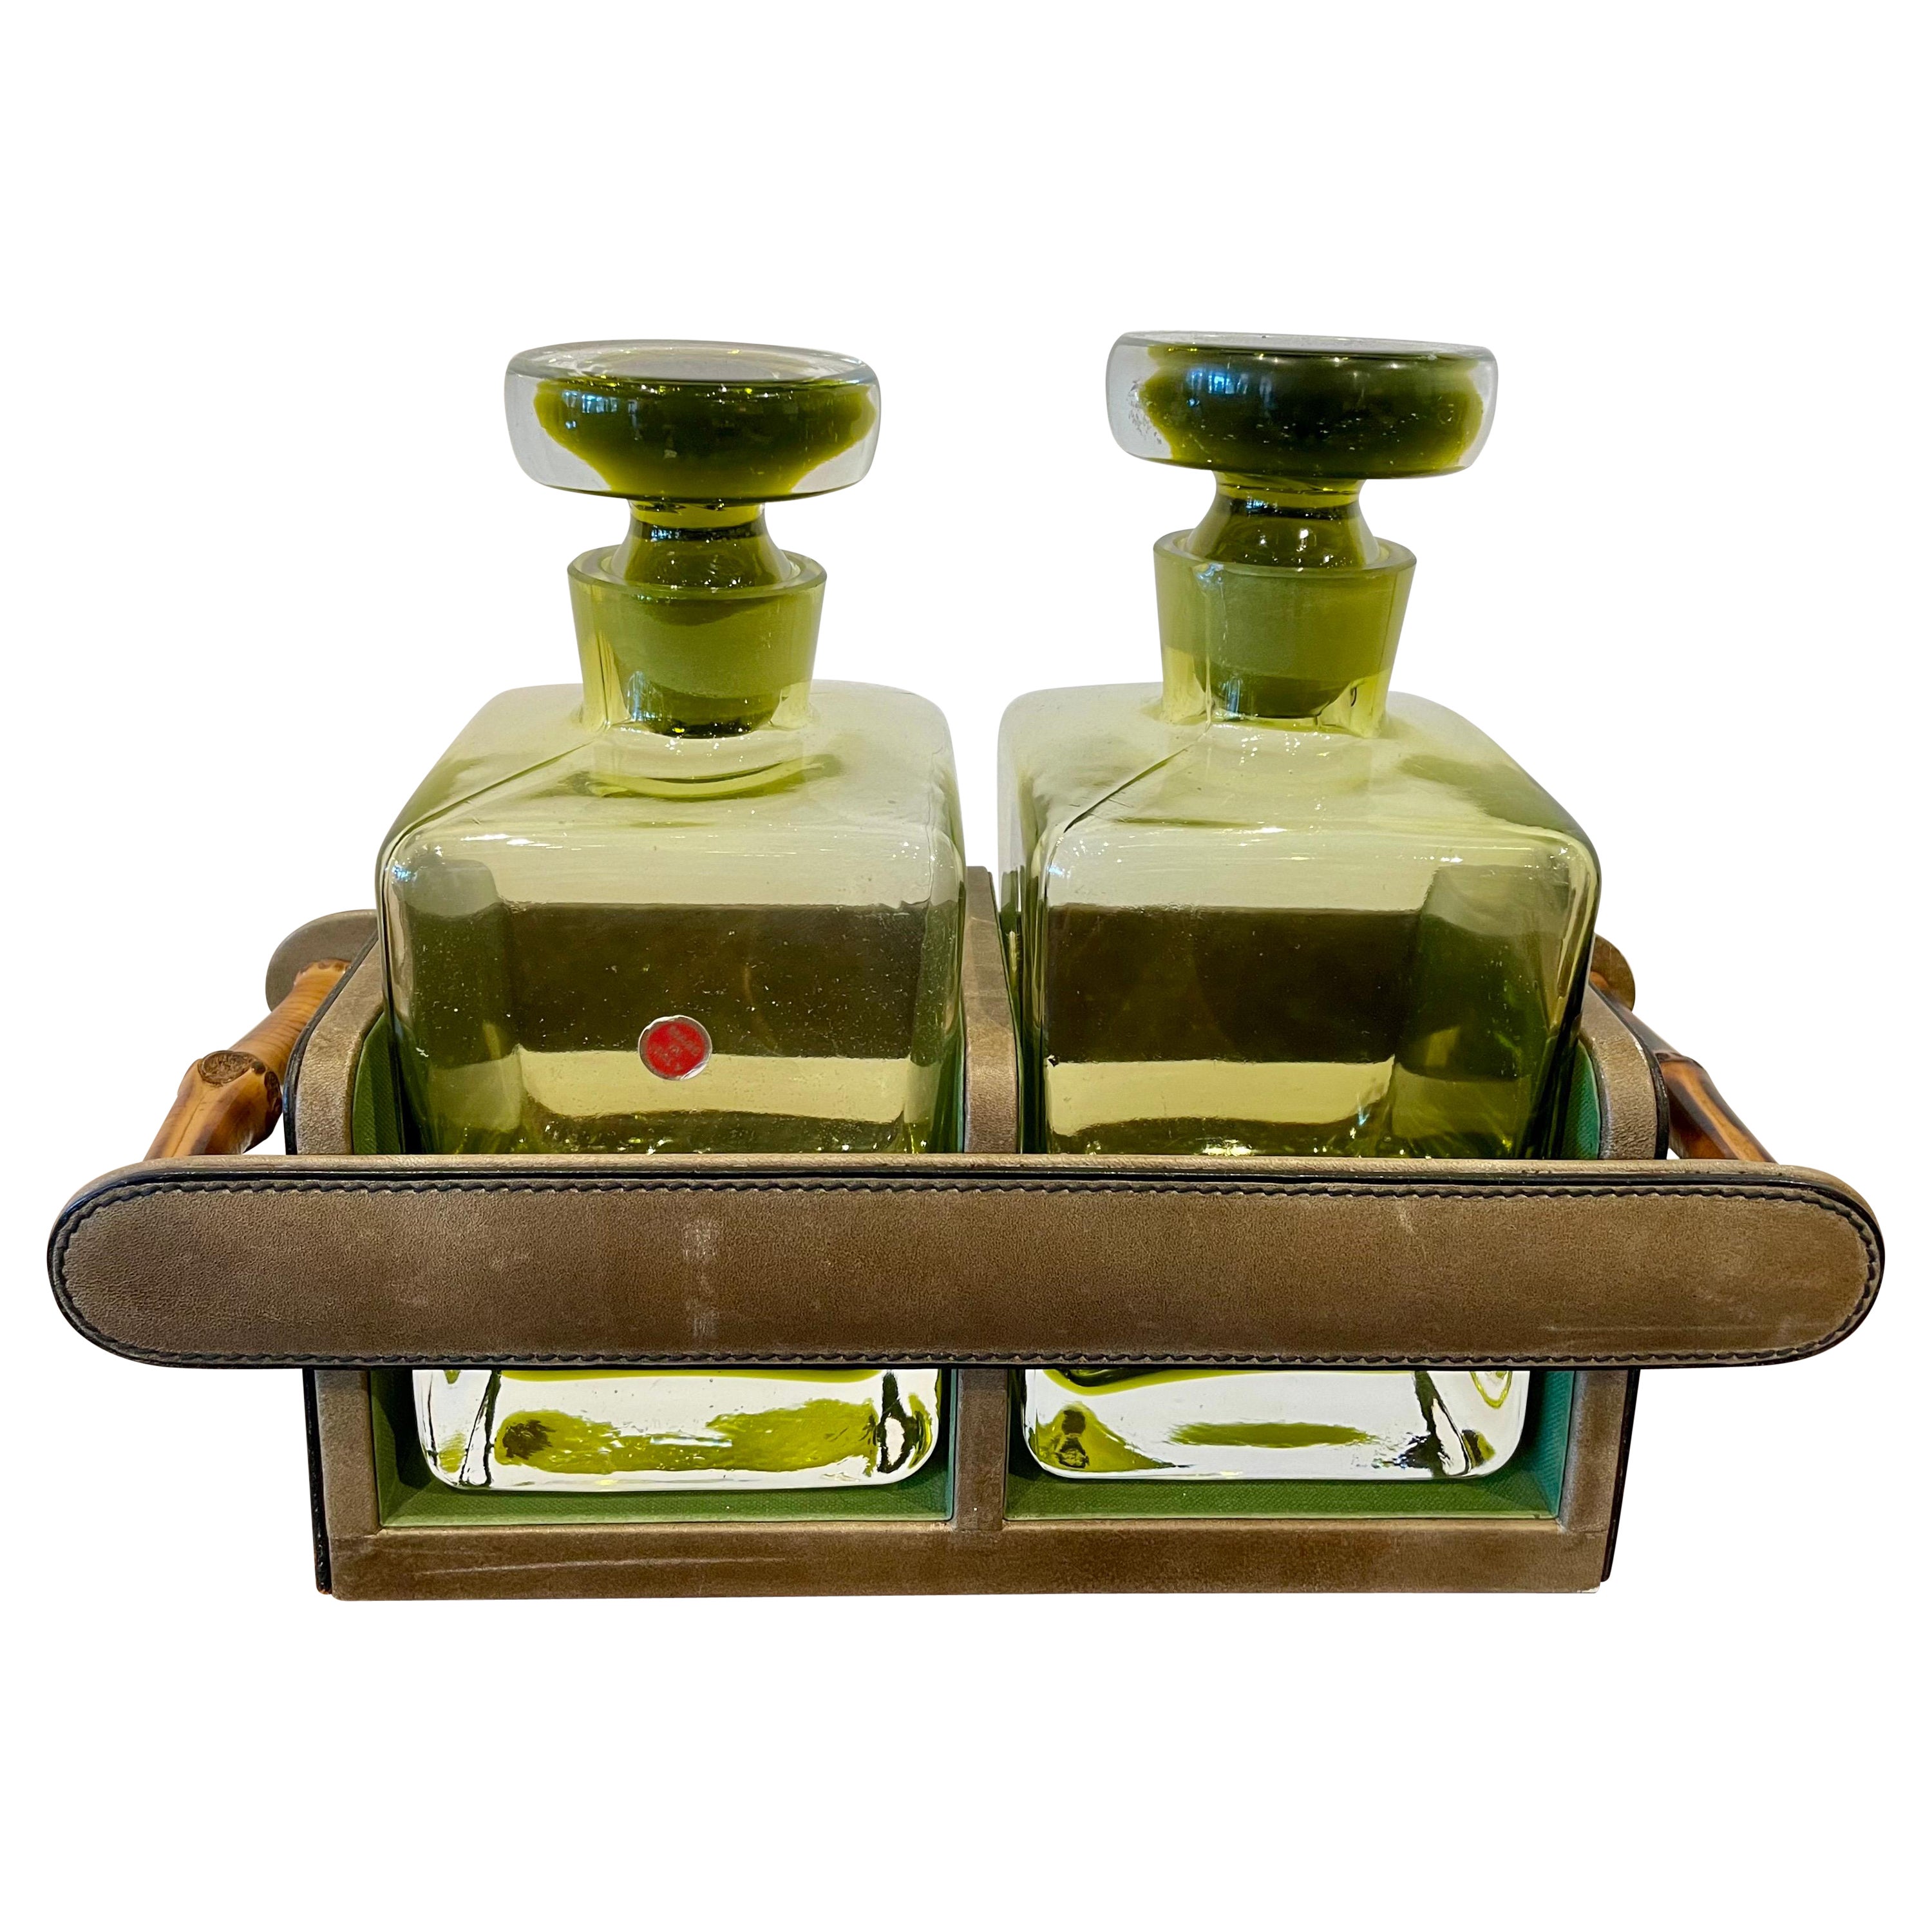 Rare Stitched Leather Holder and Italian Glass Decanter Set For Sale